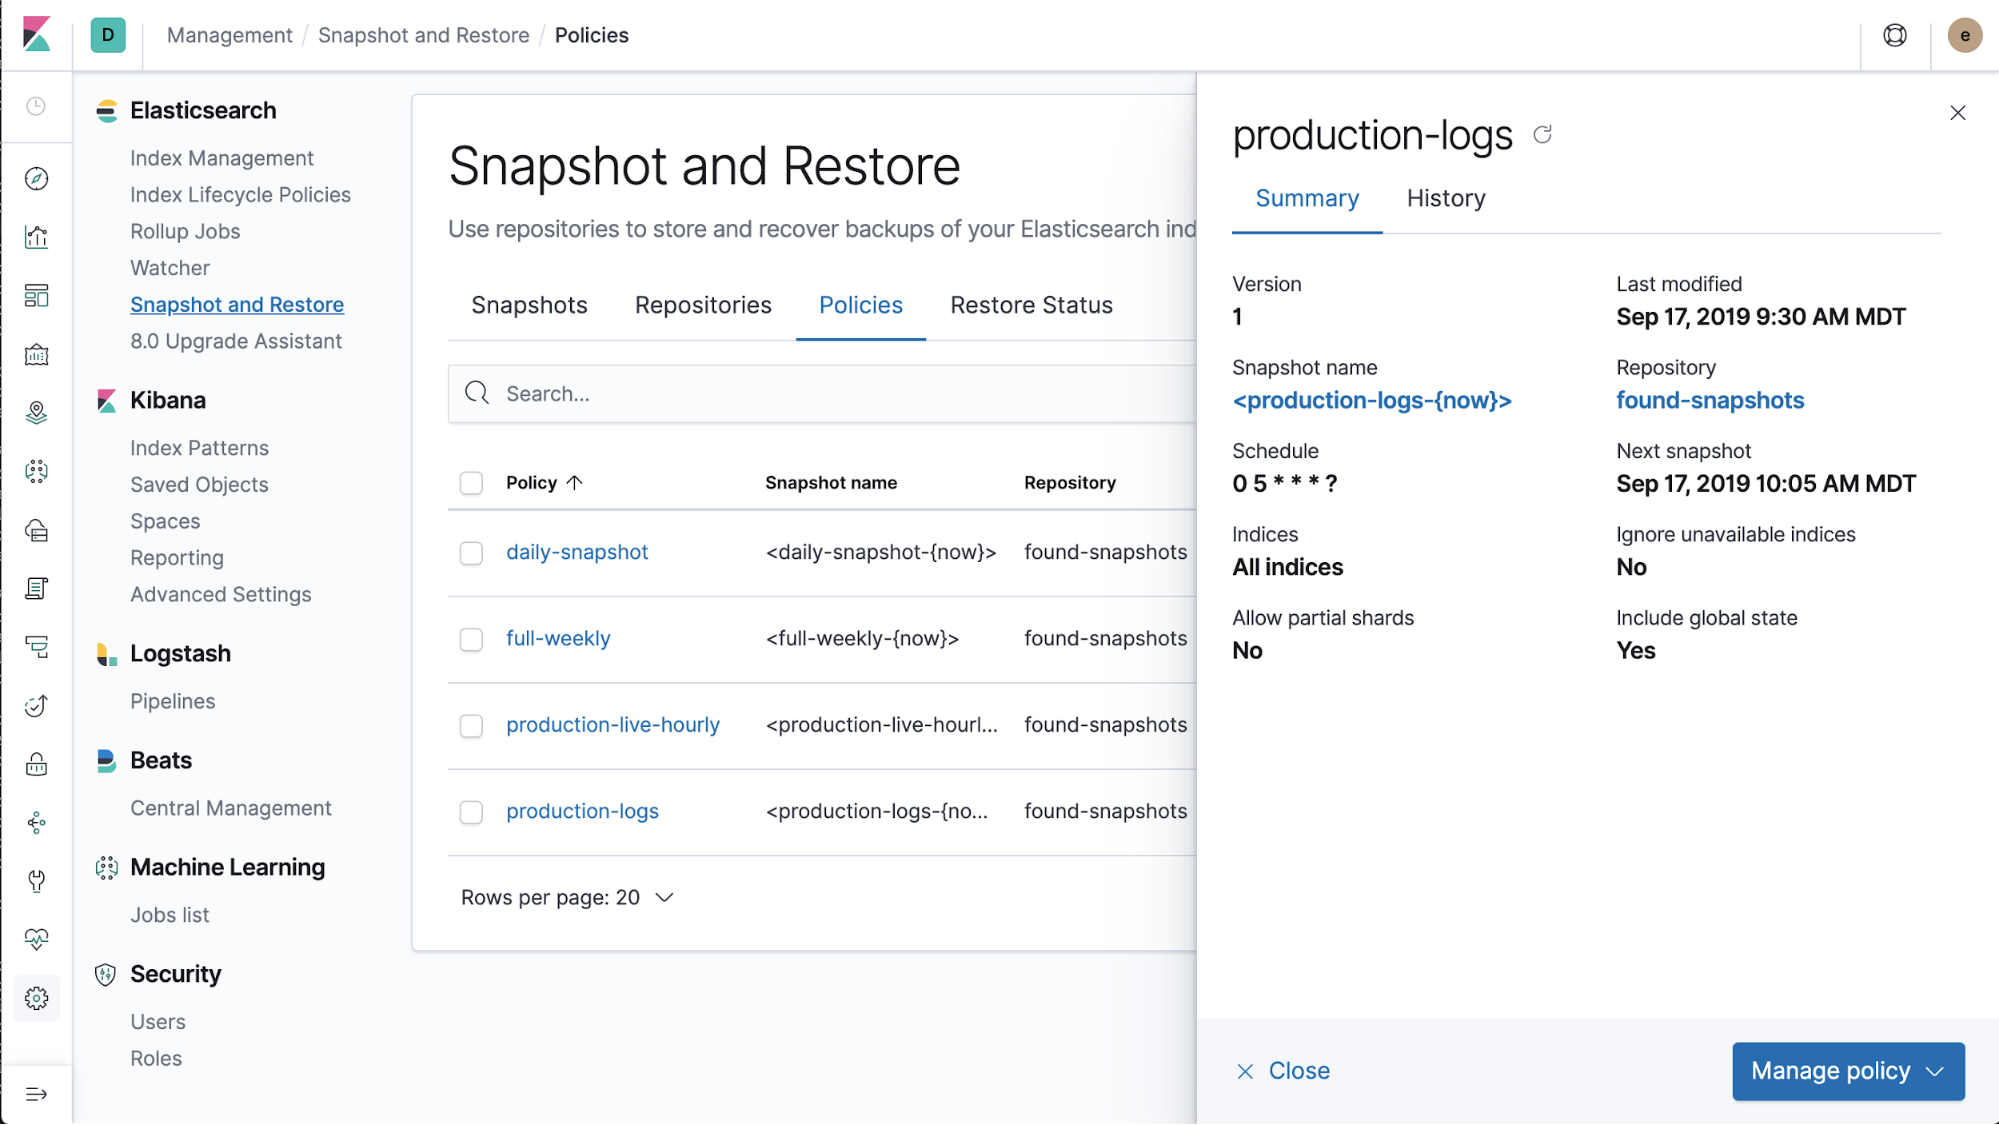 Policies view in Snapshot and Restore